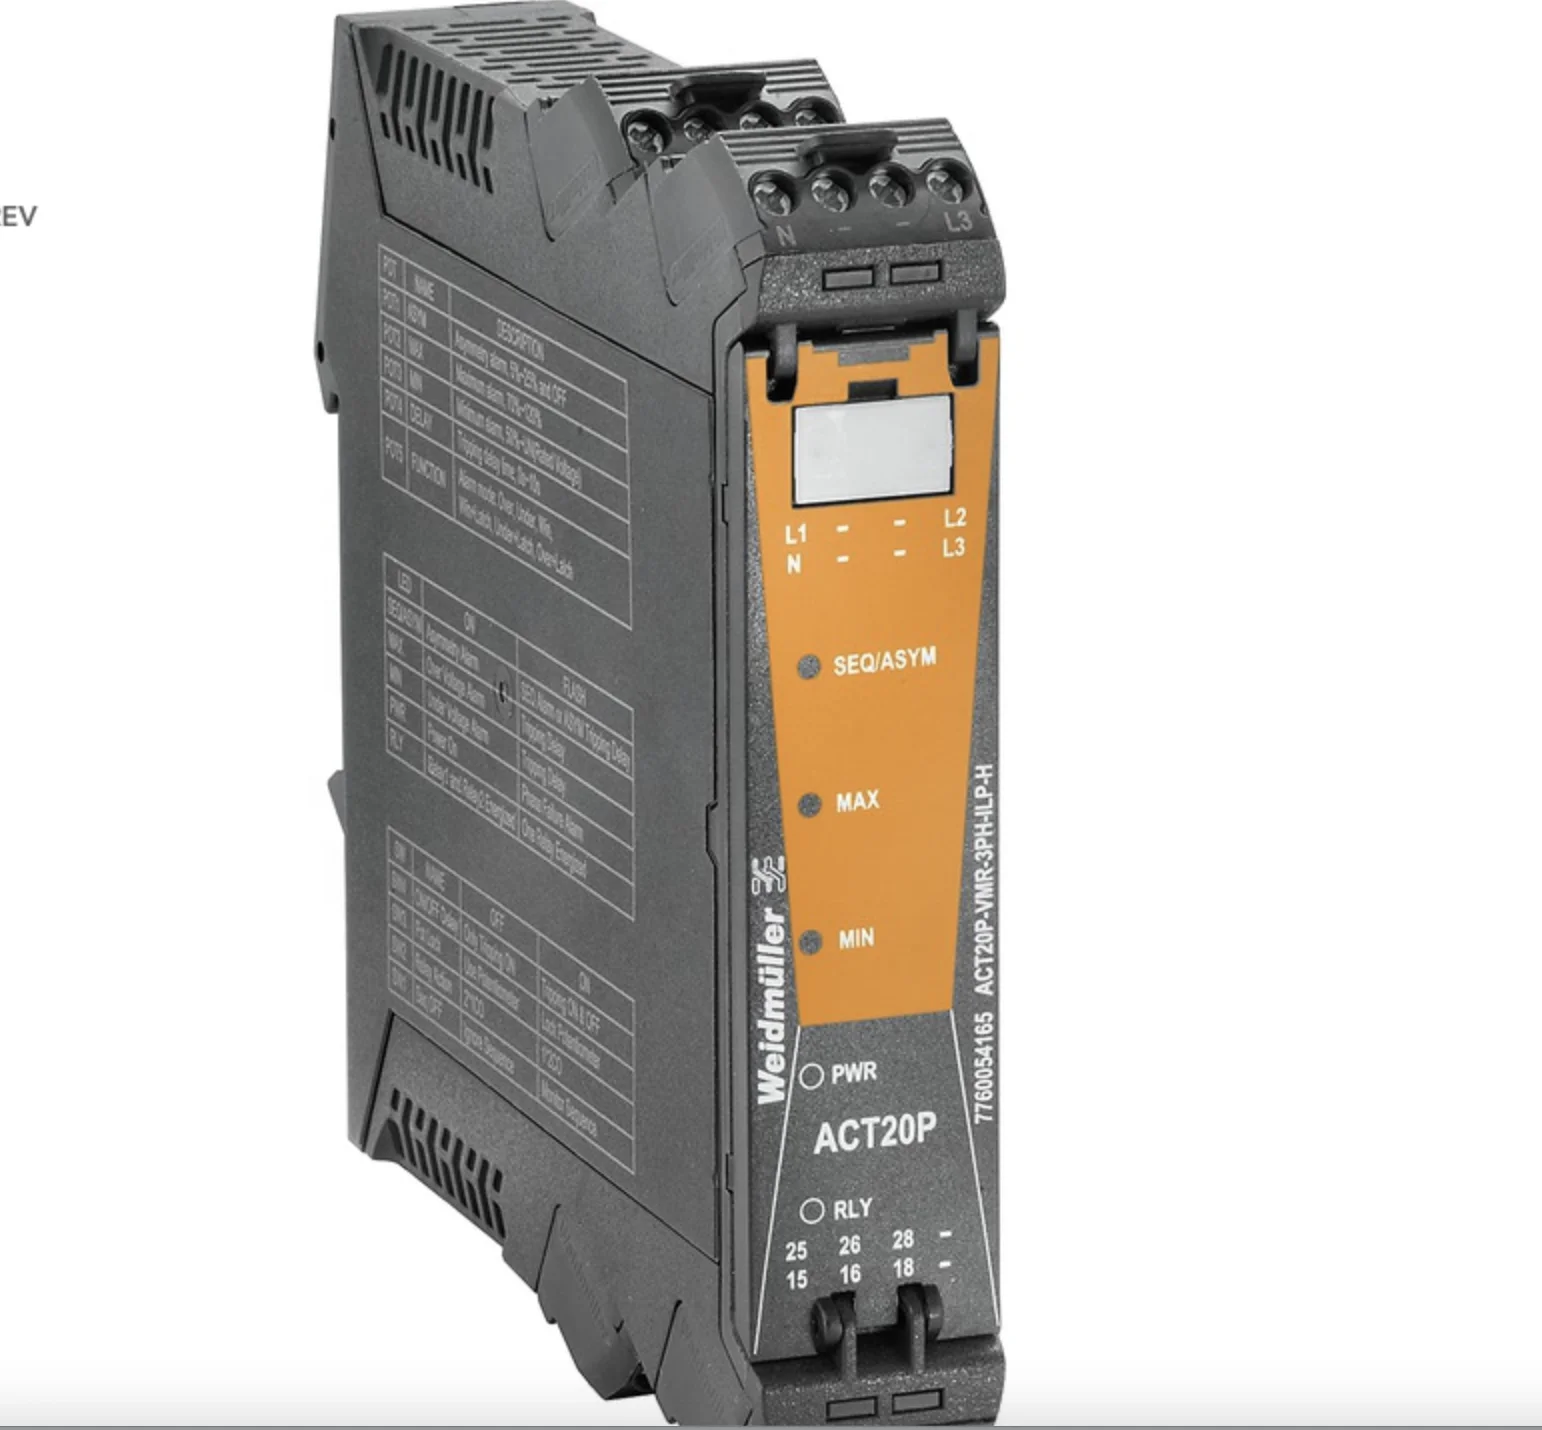 

Weidmuller ACT20P voltage setpoint limit monitor relay